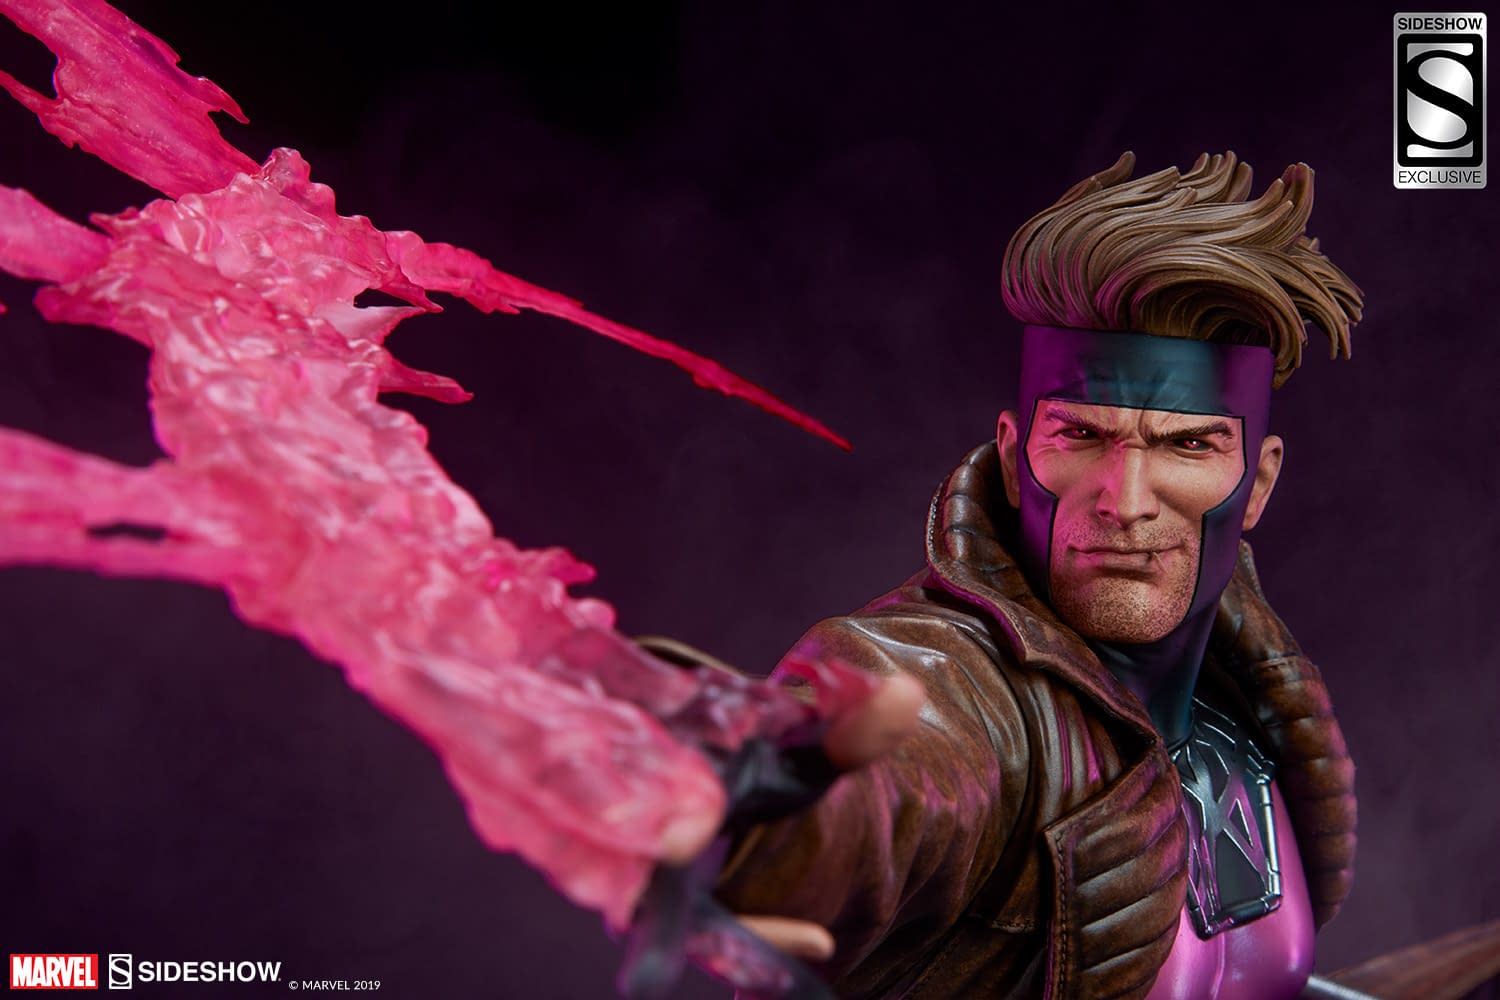 Gambit Enters the Danger Room with New Sideshow Collectible Statue 